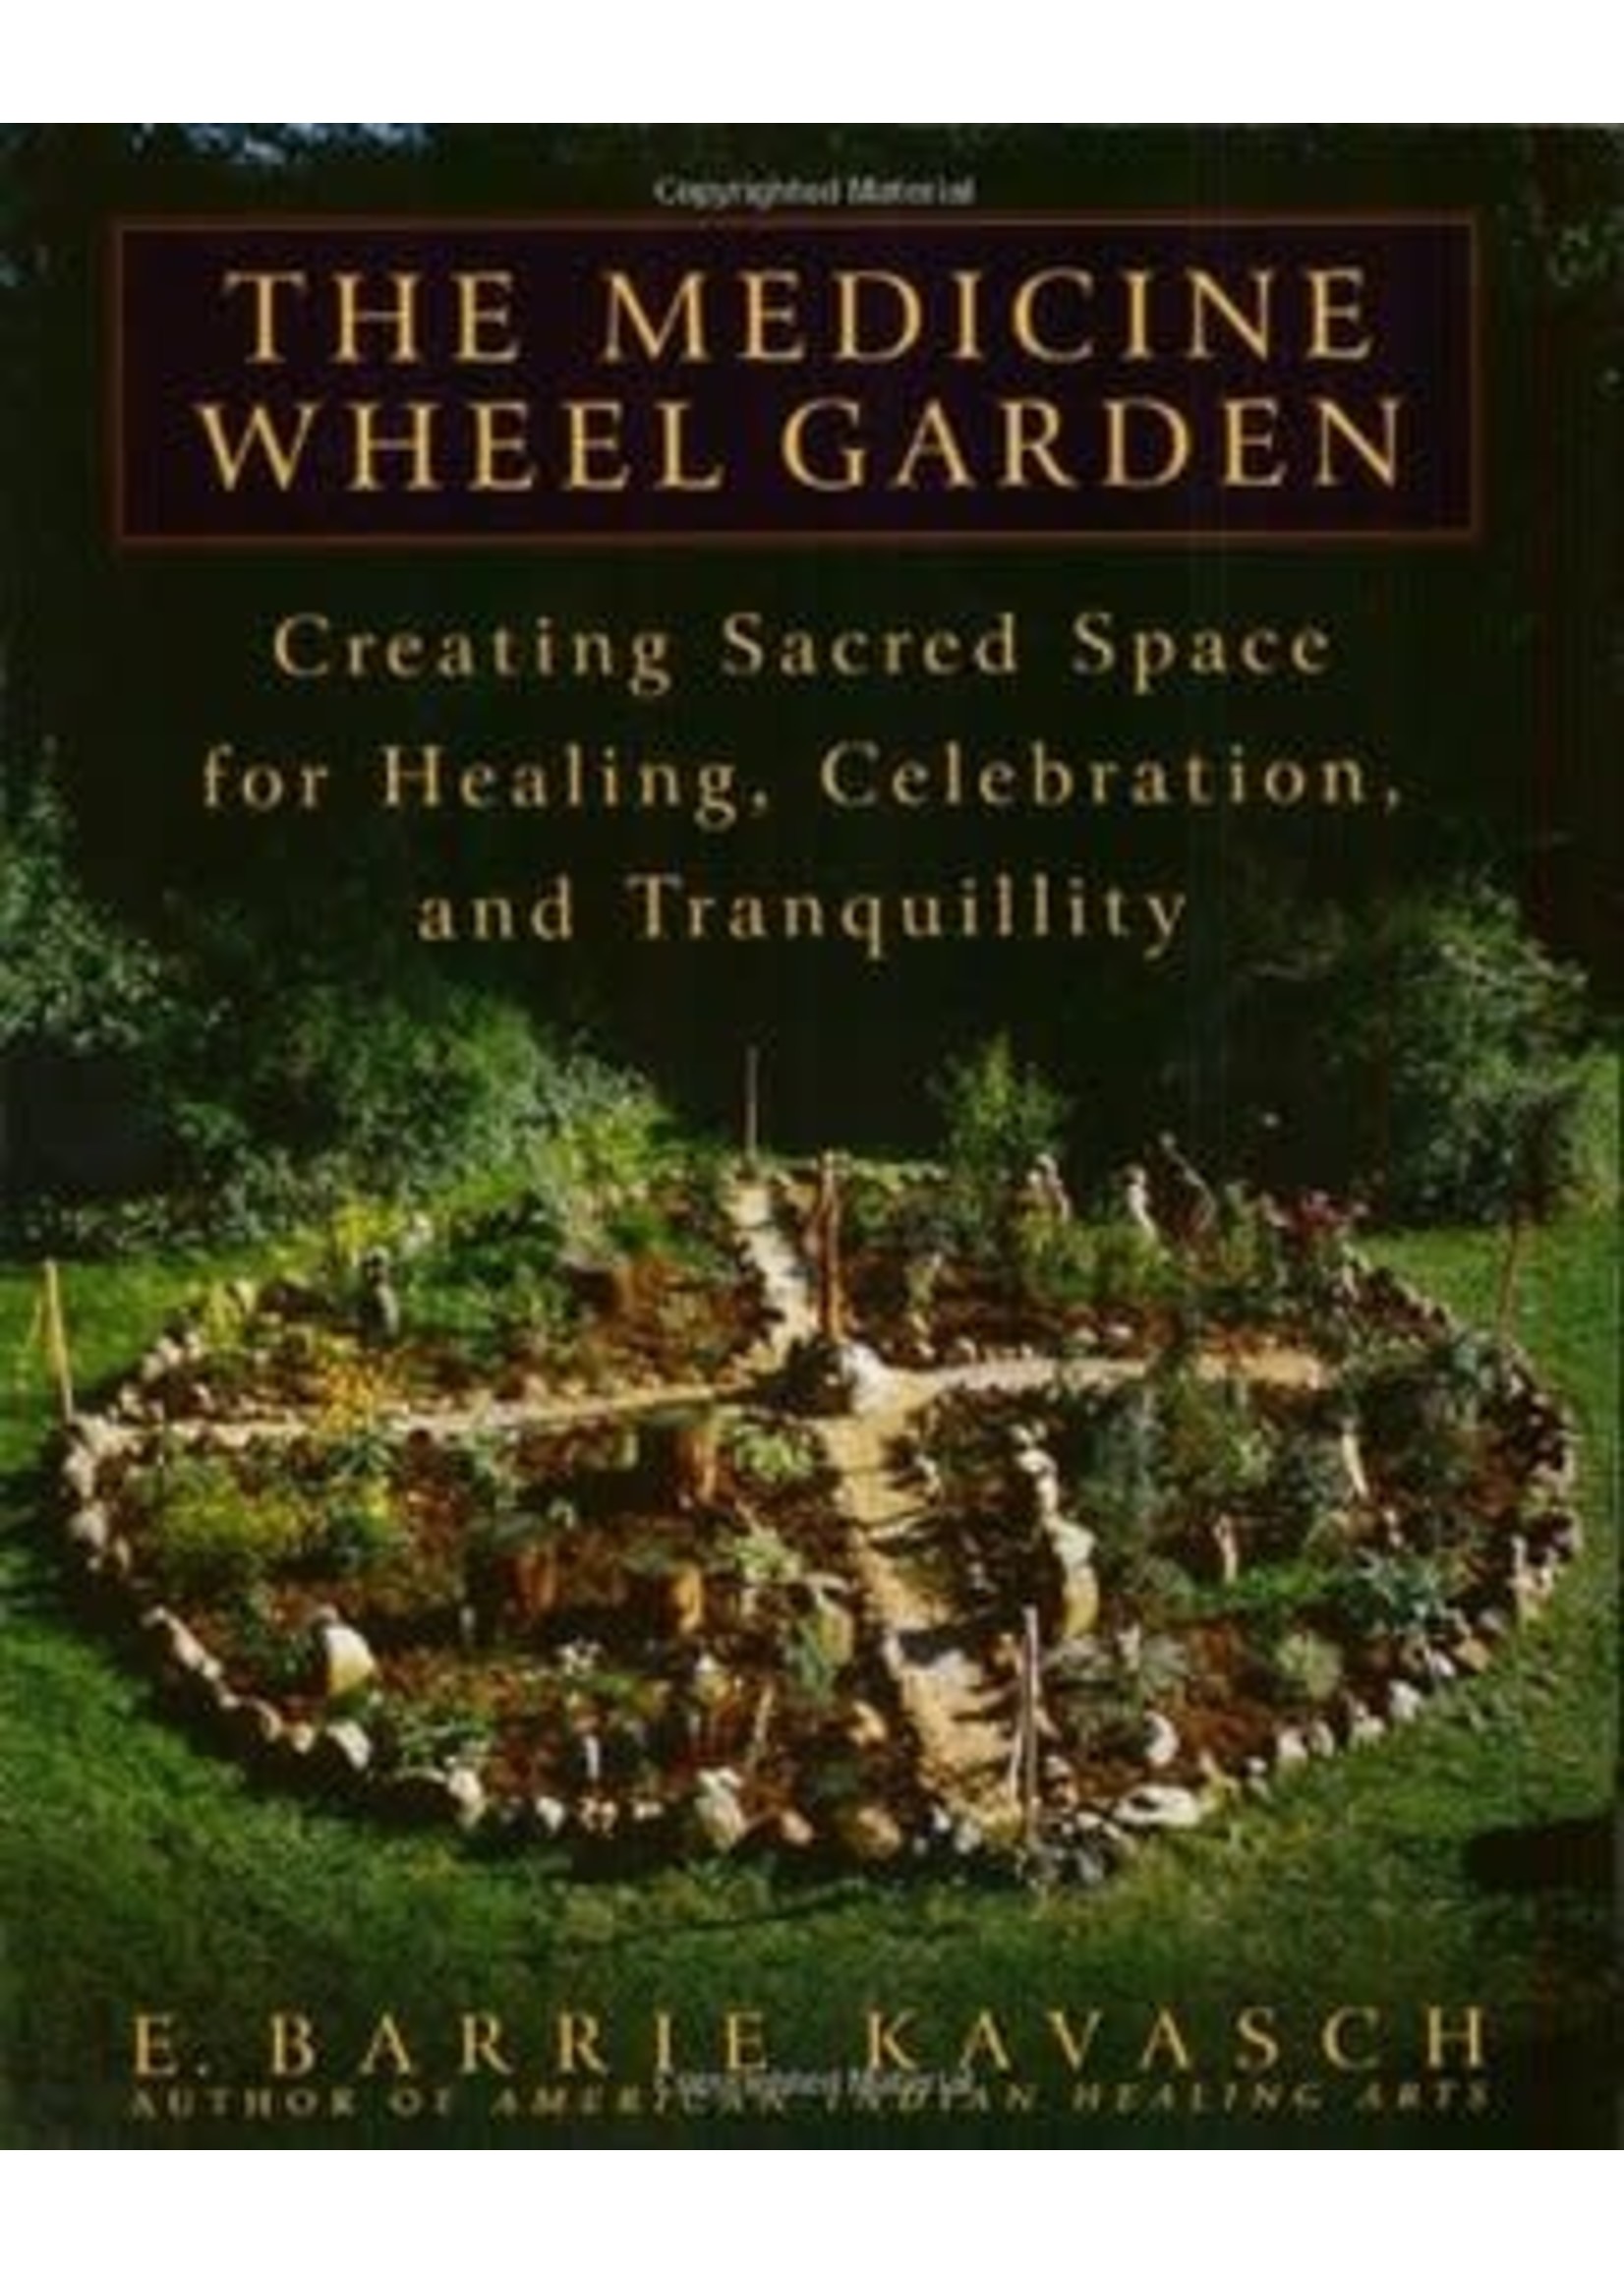 The Medicine Wheel Garden: Creating Sacred Space for Healing, Celebration, and Tranquillity by E. Barrie Kavasch